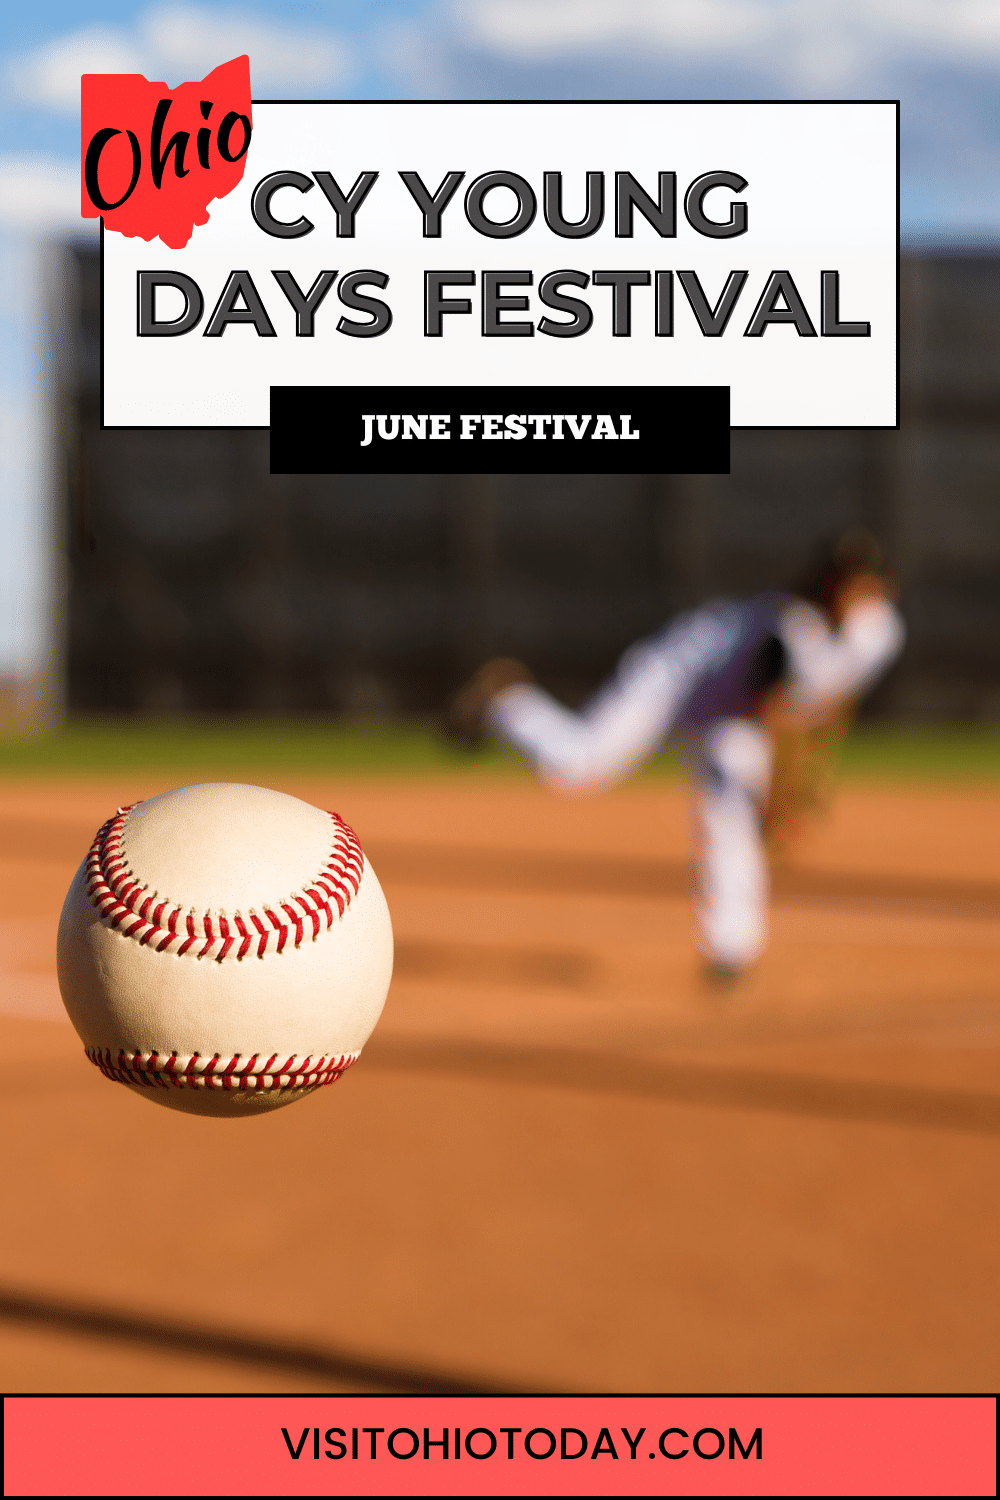 Cy Young Days Festival is a summertime event occurring at the end of June to honor Ohioan and Hall of Famer Cy Young and his beloved sport of baseball.